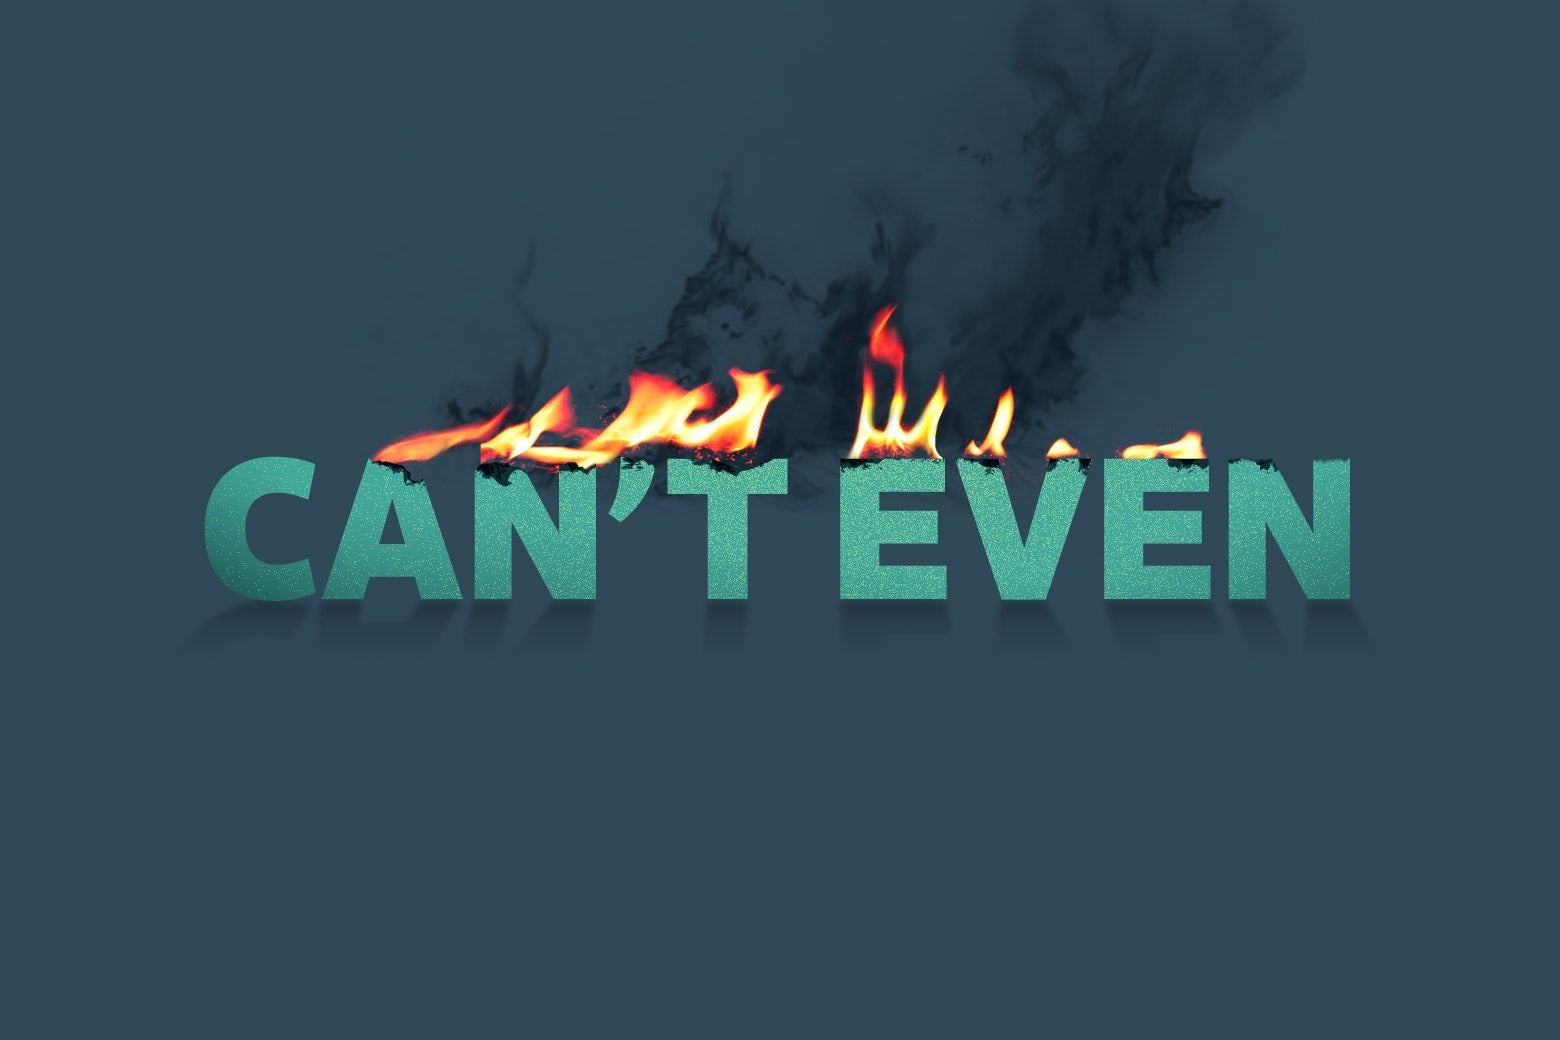 The words "Can't Even" are seen on fire.